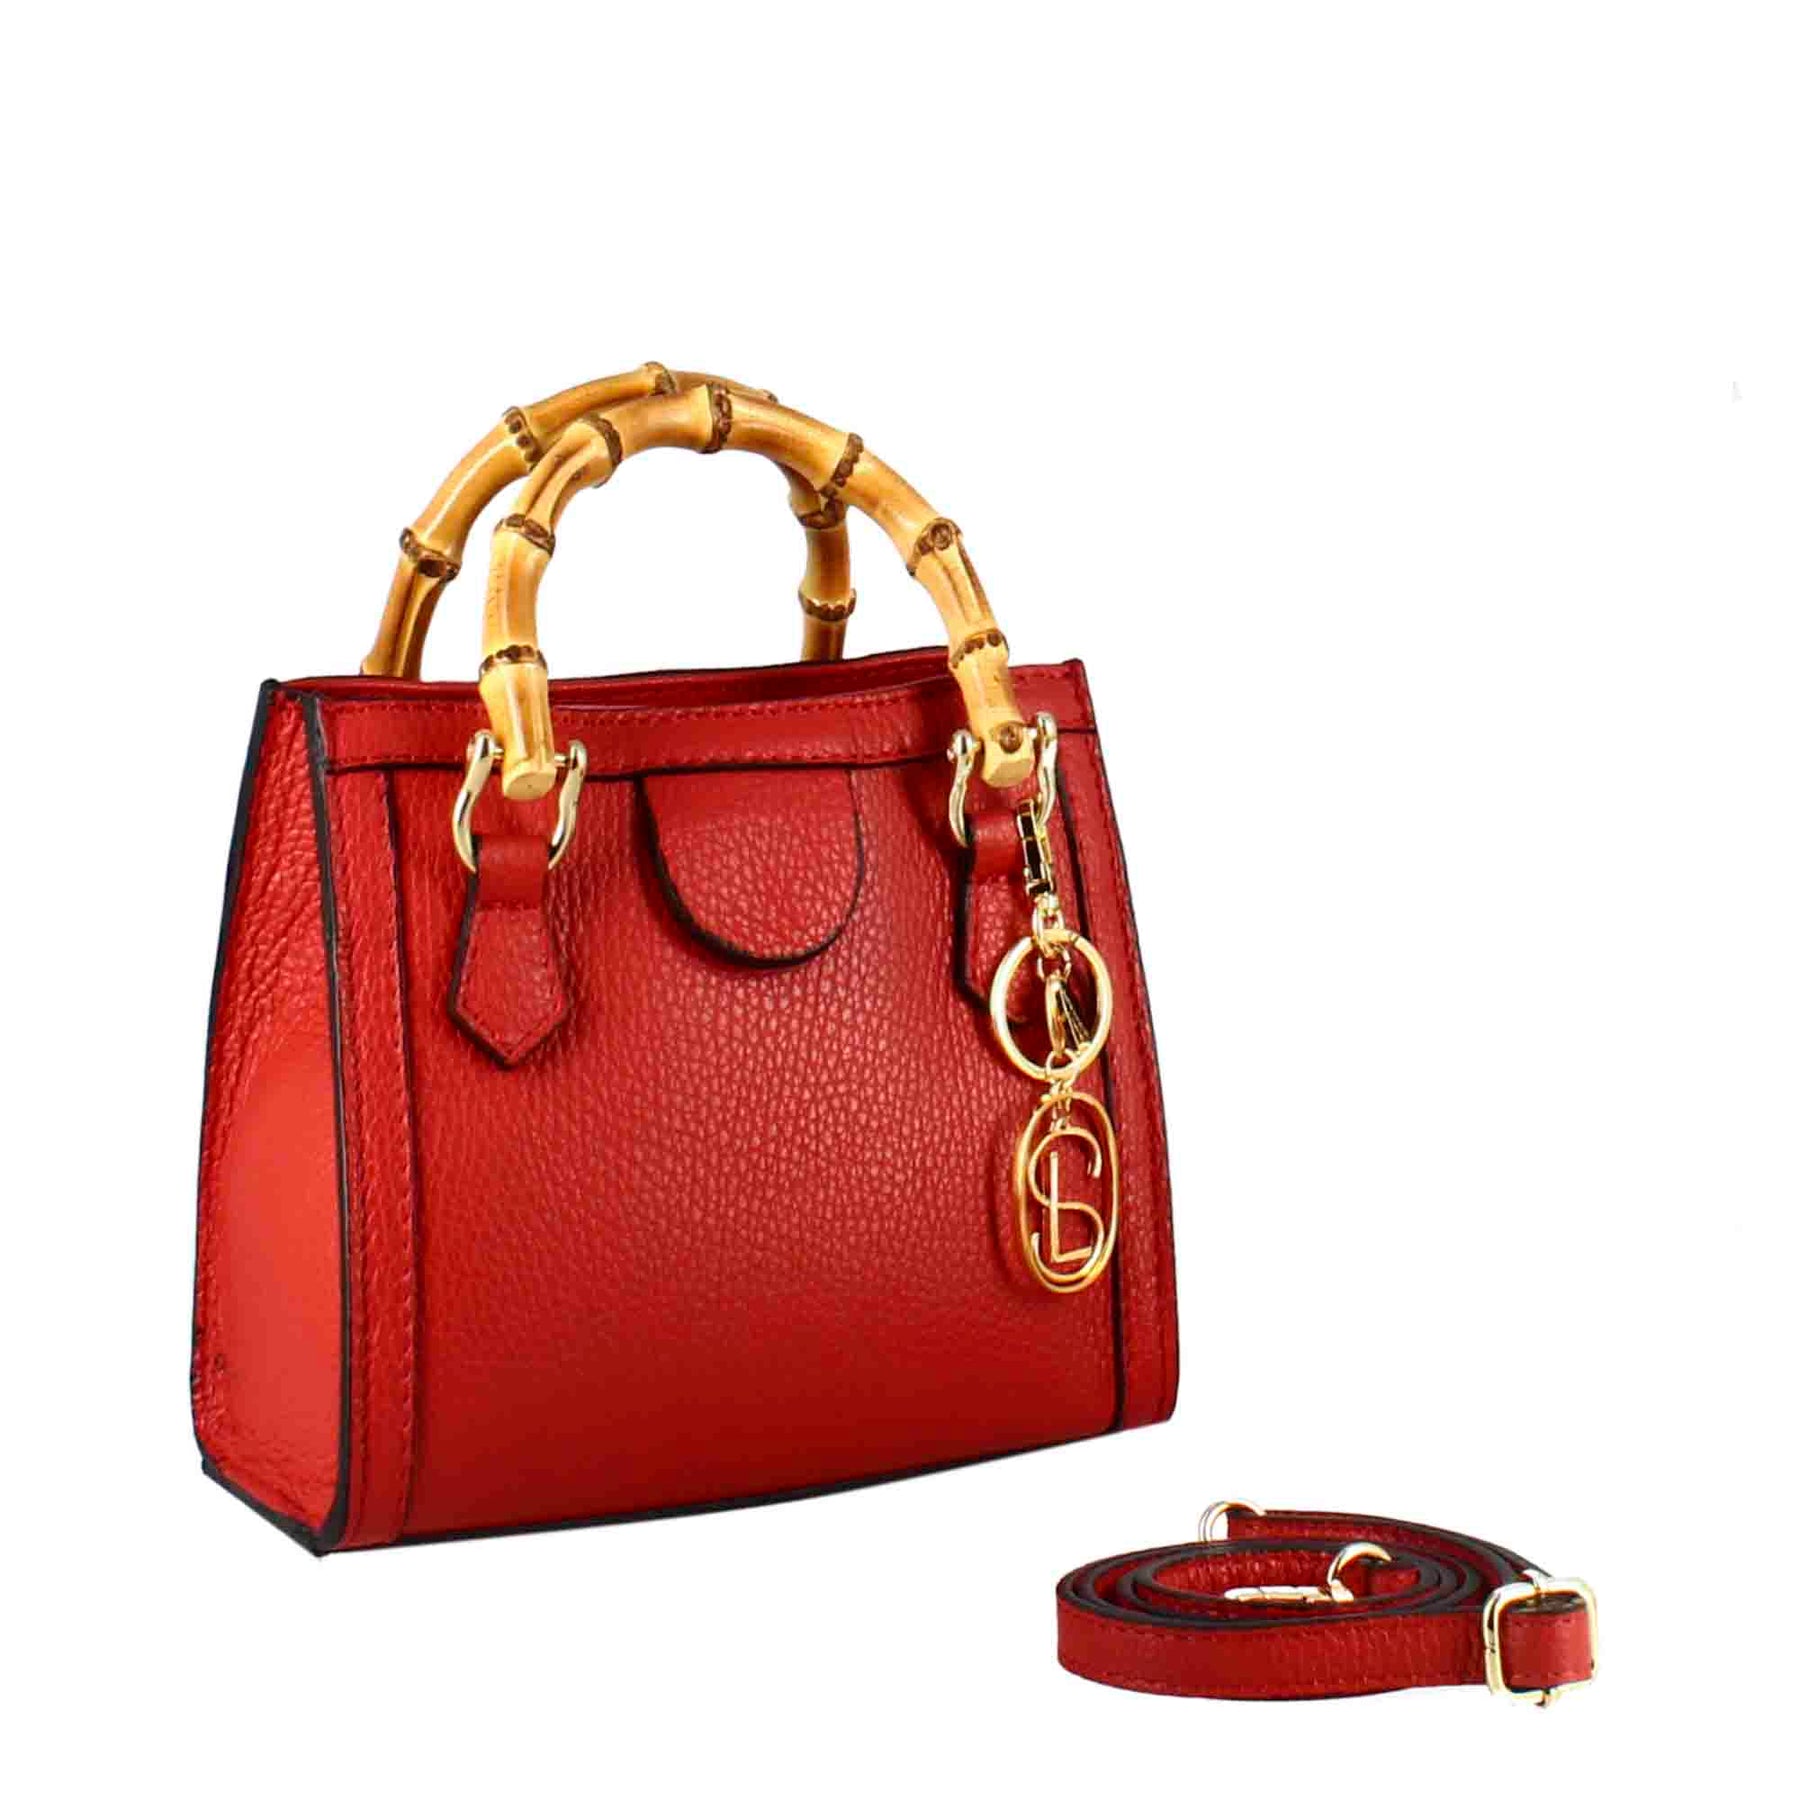 Red leather mini Bamboo handbag for women with wooden handles and shoulder strap